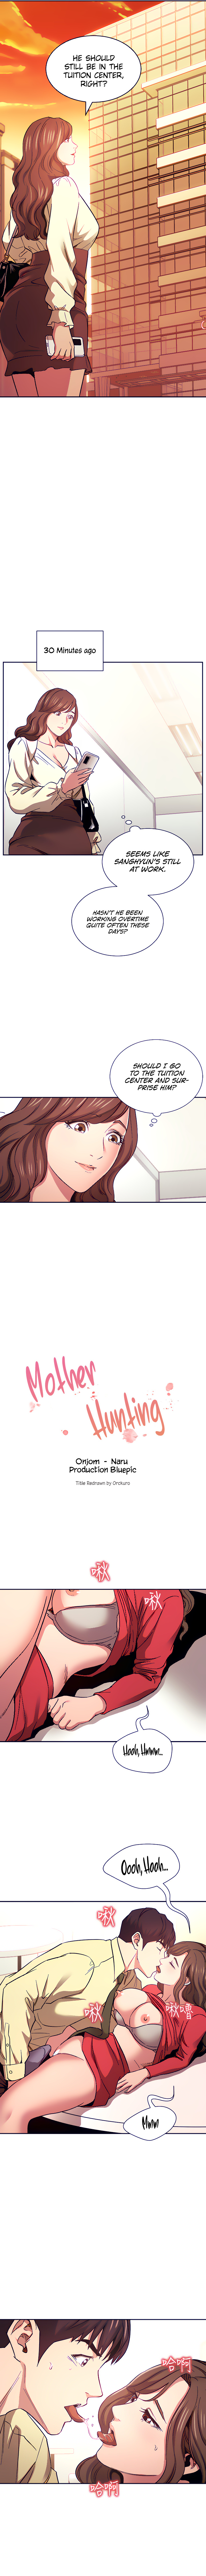 Mother Hunting - Page 3